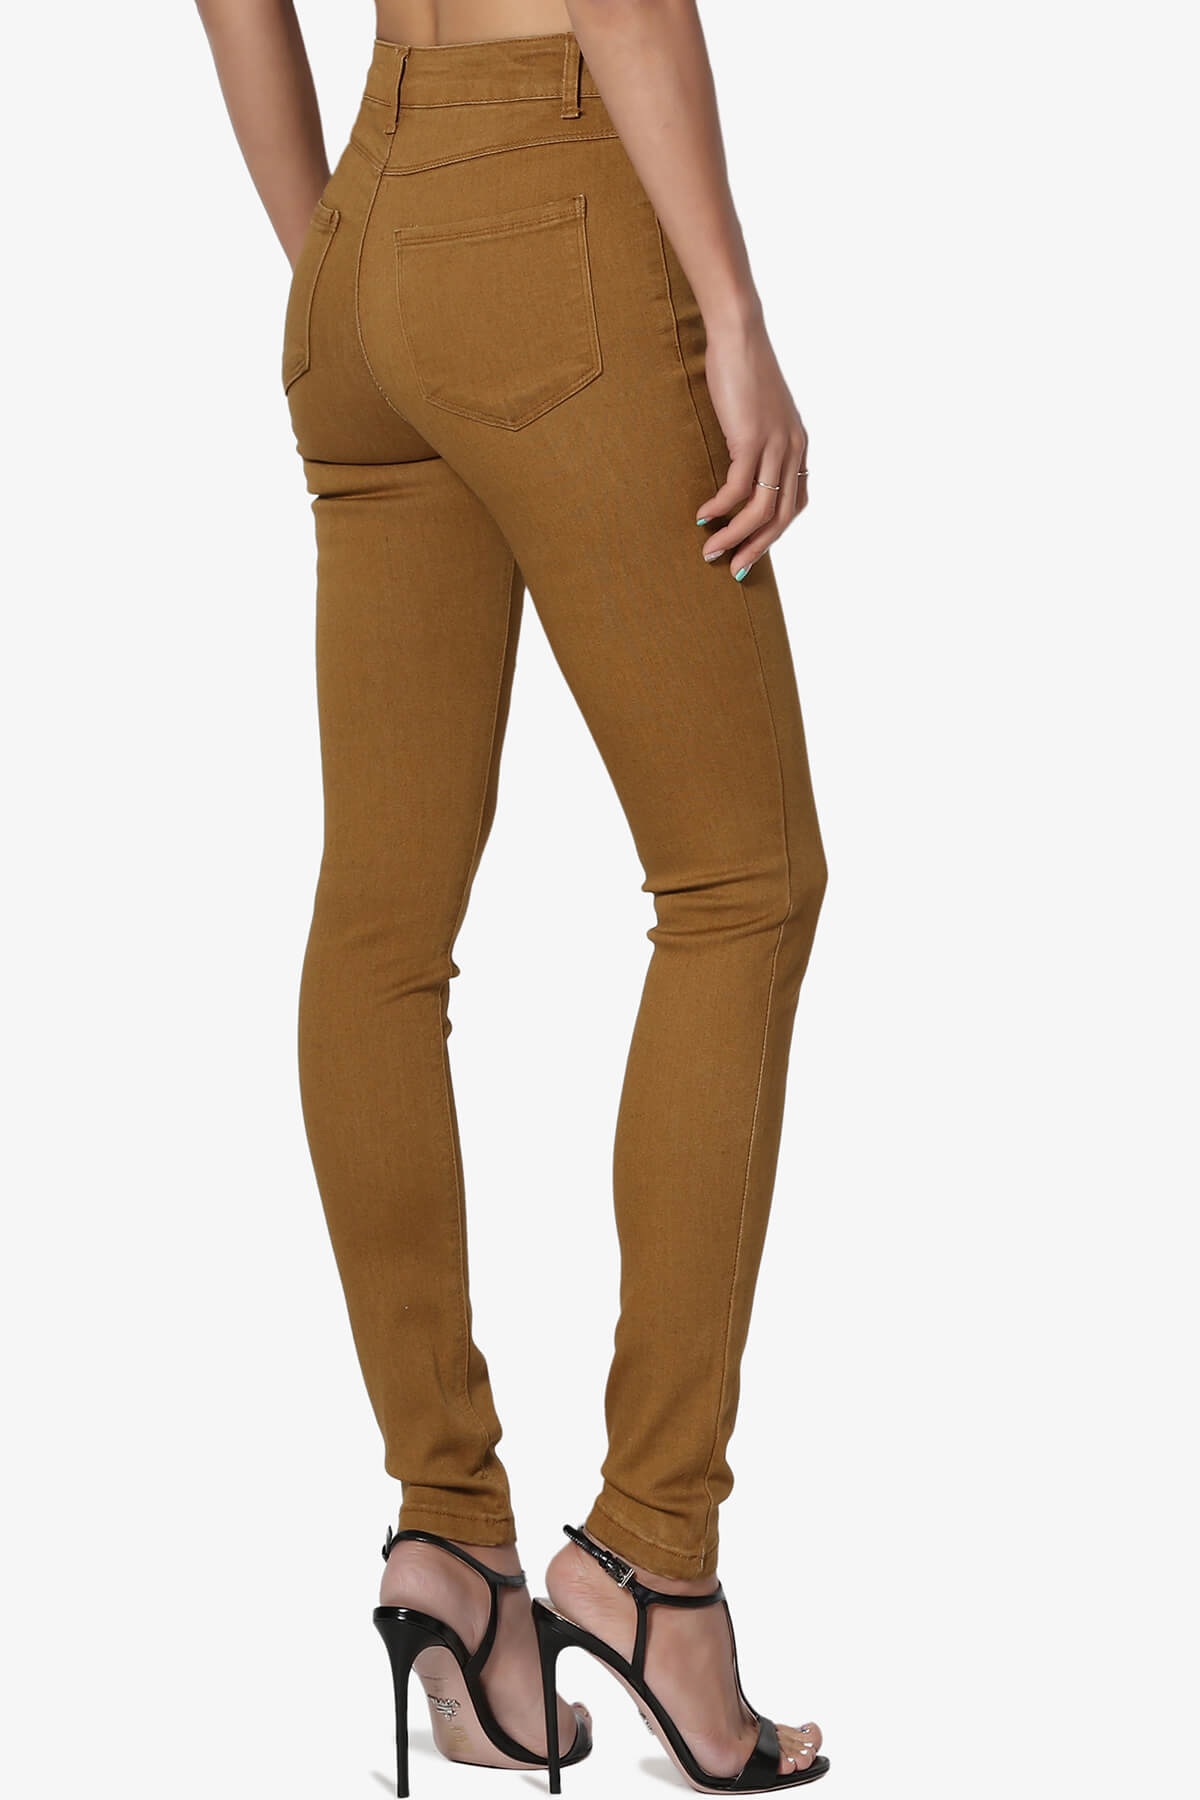 Women's Must-Have Colored High Rise Ankle Skinny Jeans Stretch Denim Jeggings - image 4 of 7